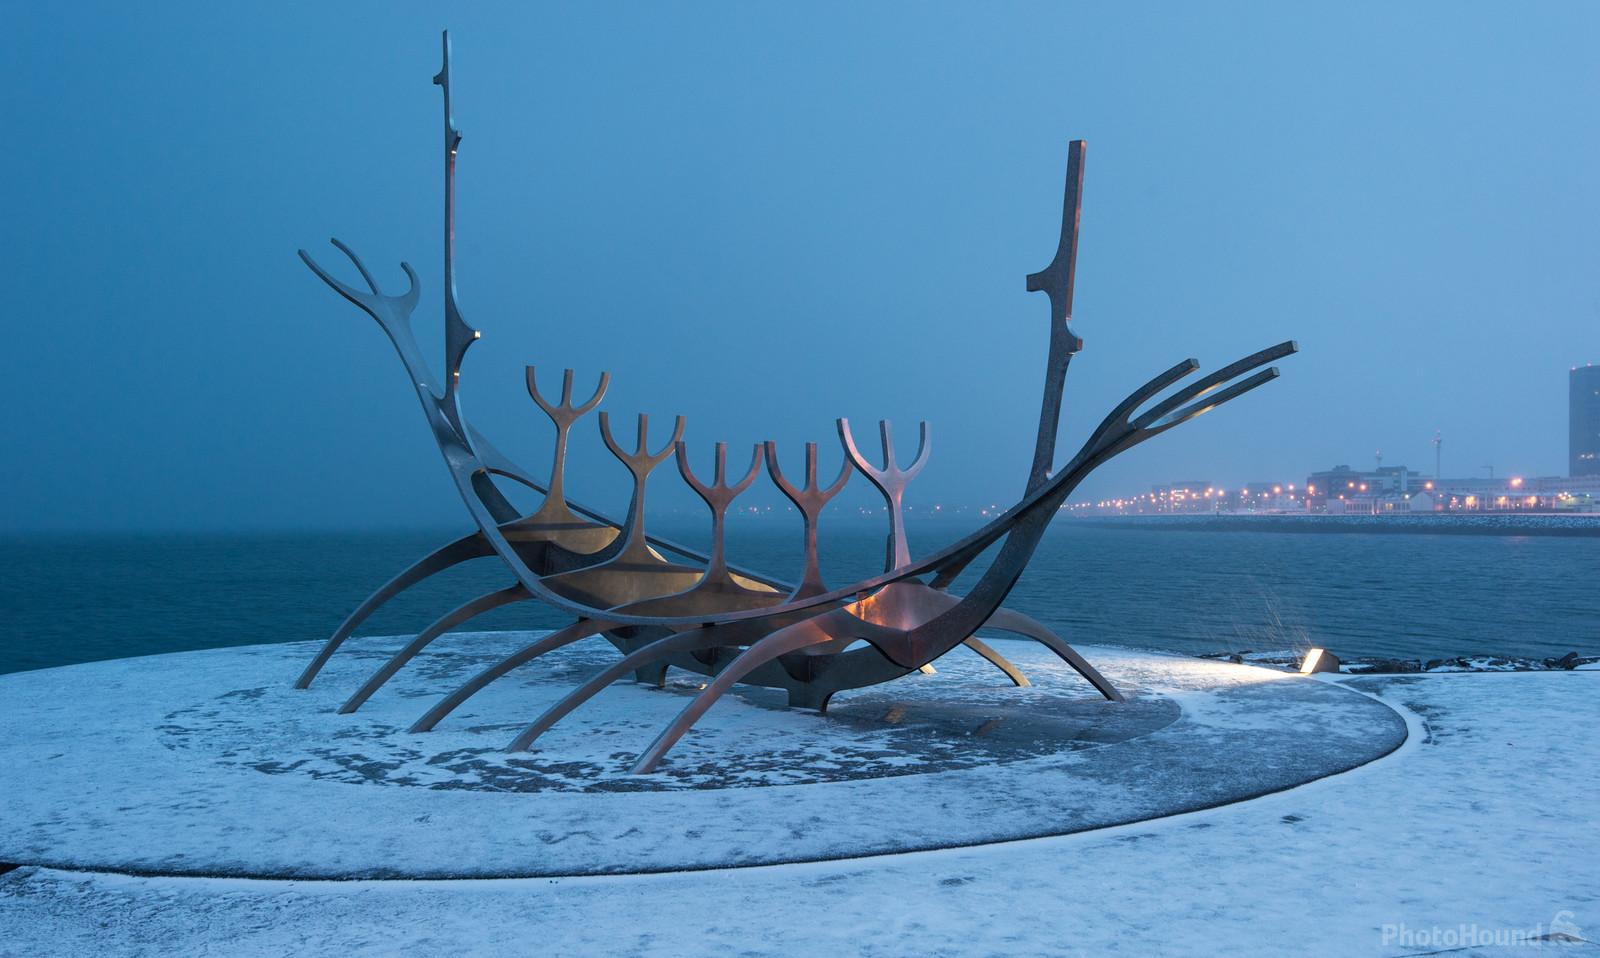 Image of Sun voyager by Richard Lizzimore